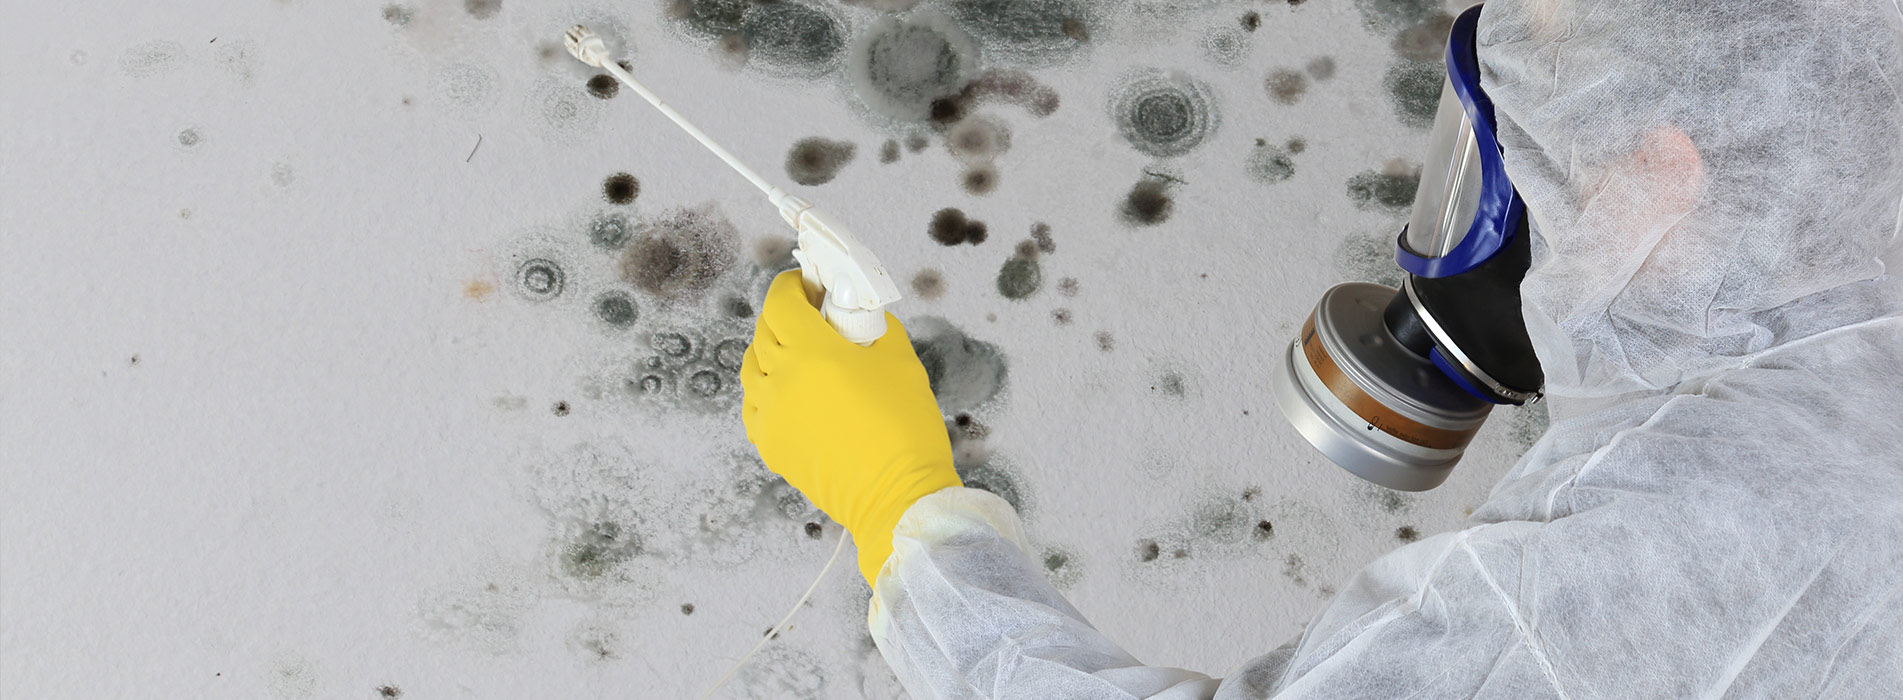 Mold Inspection Cost - Tips for Eliminating Mold from Your ...